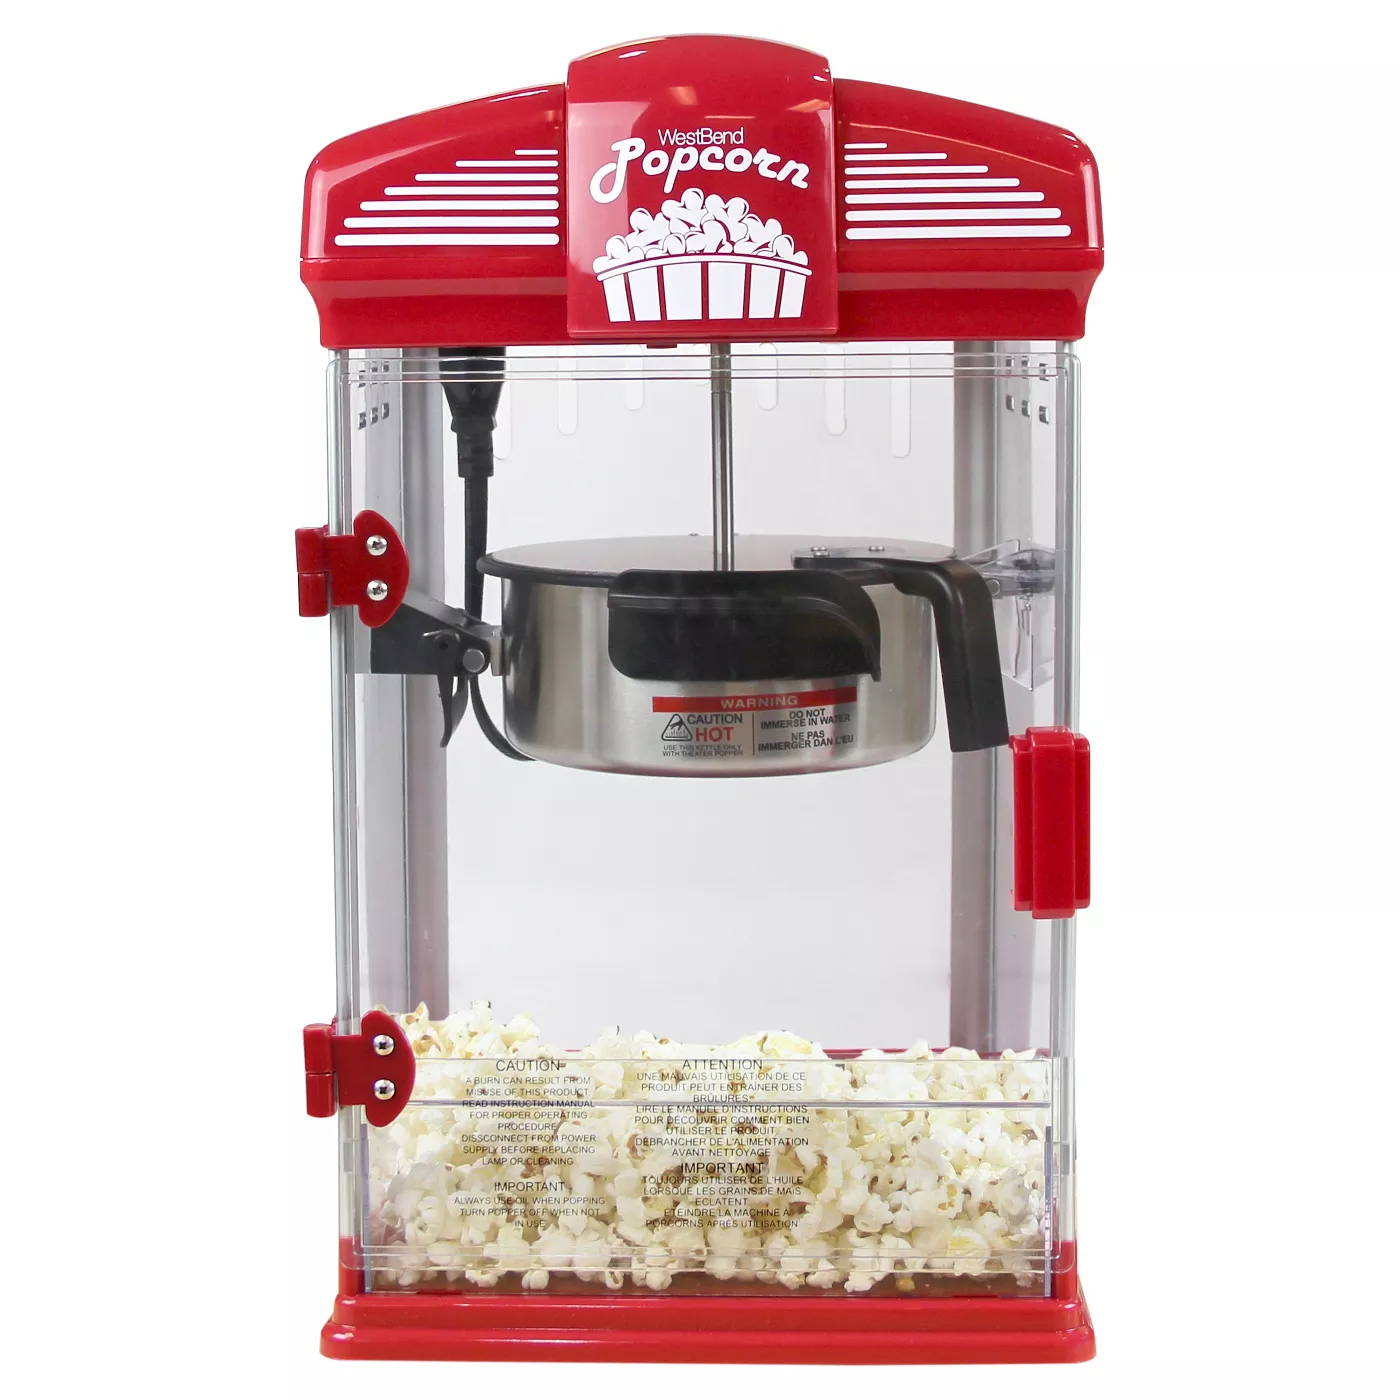 Father's Day Gift Ideas - Popcorn Maker 